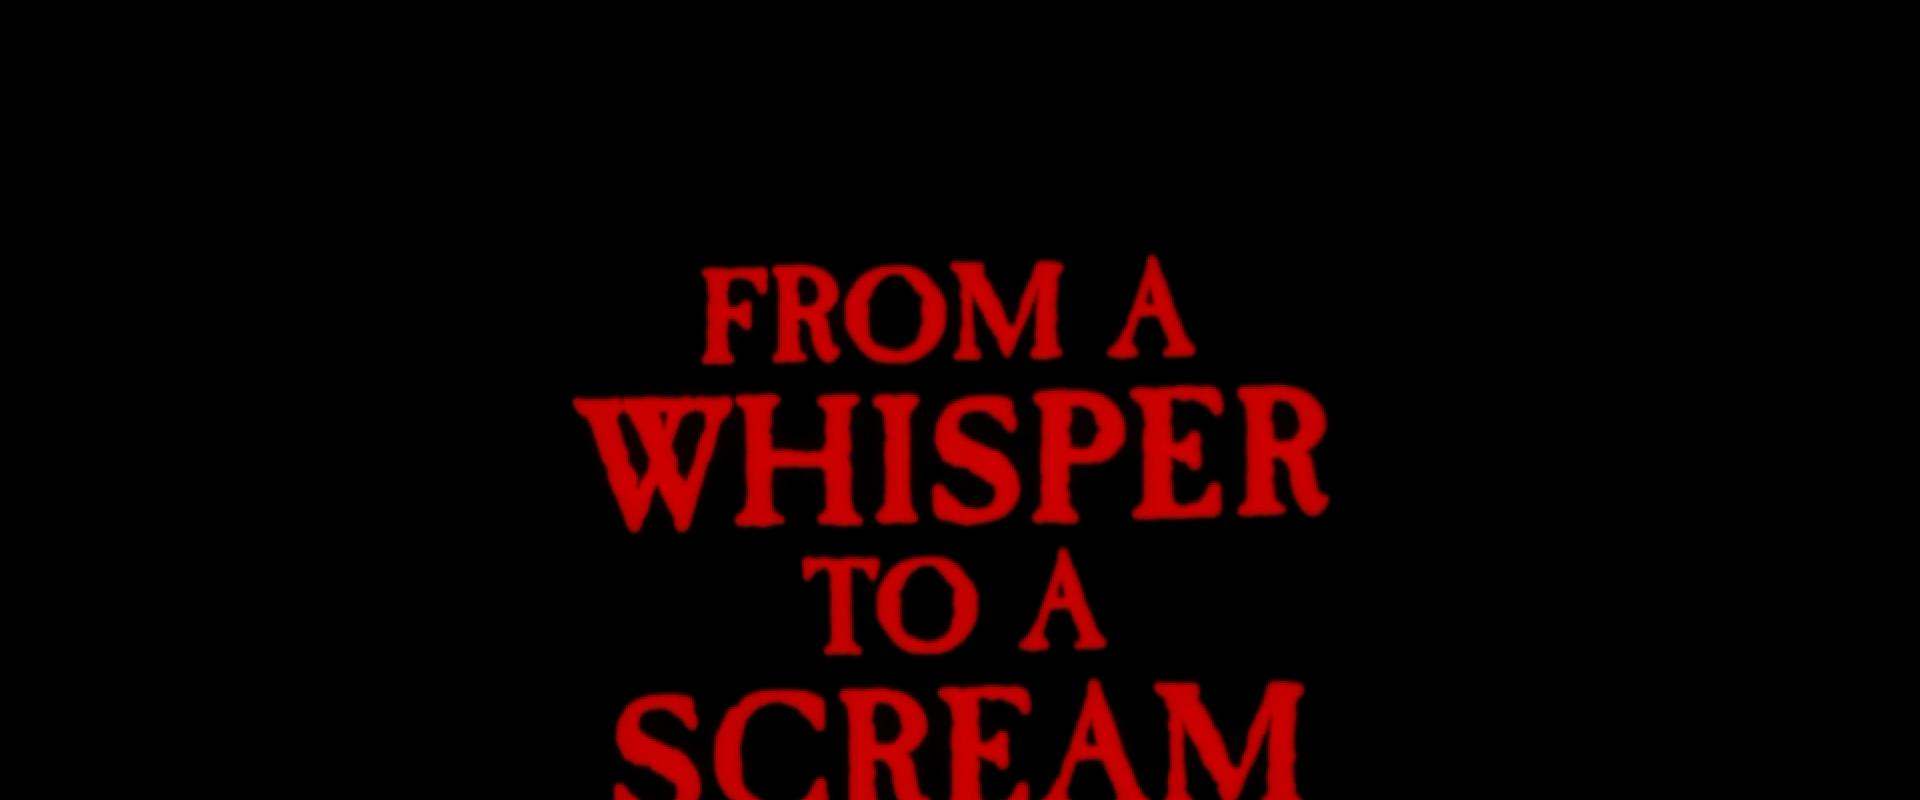 From a Whisper to a Scream background 2